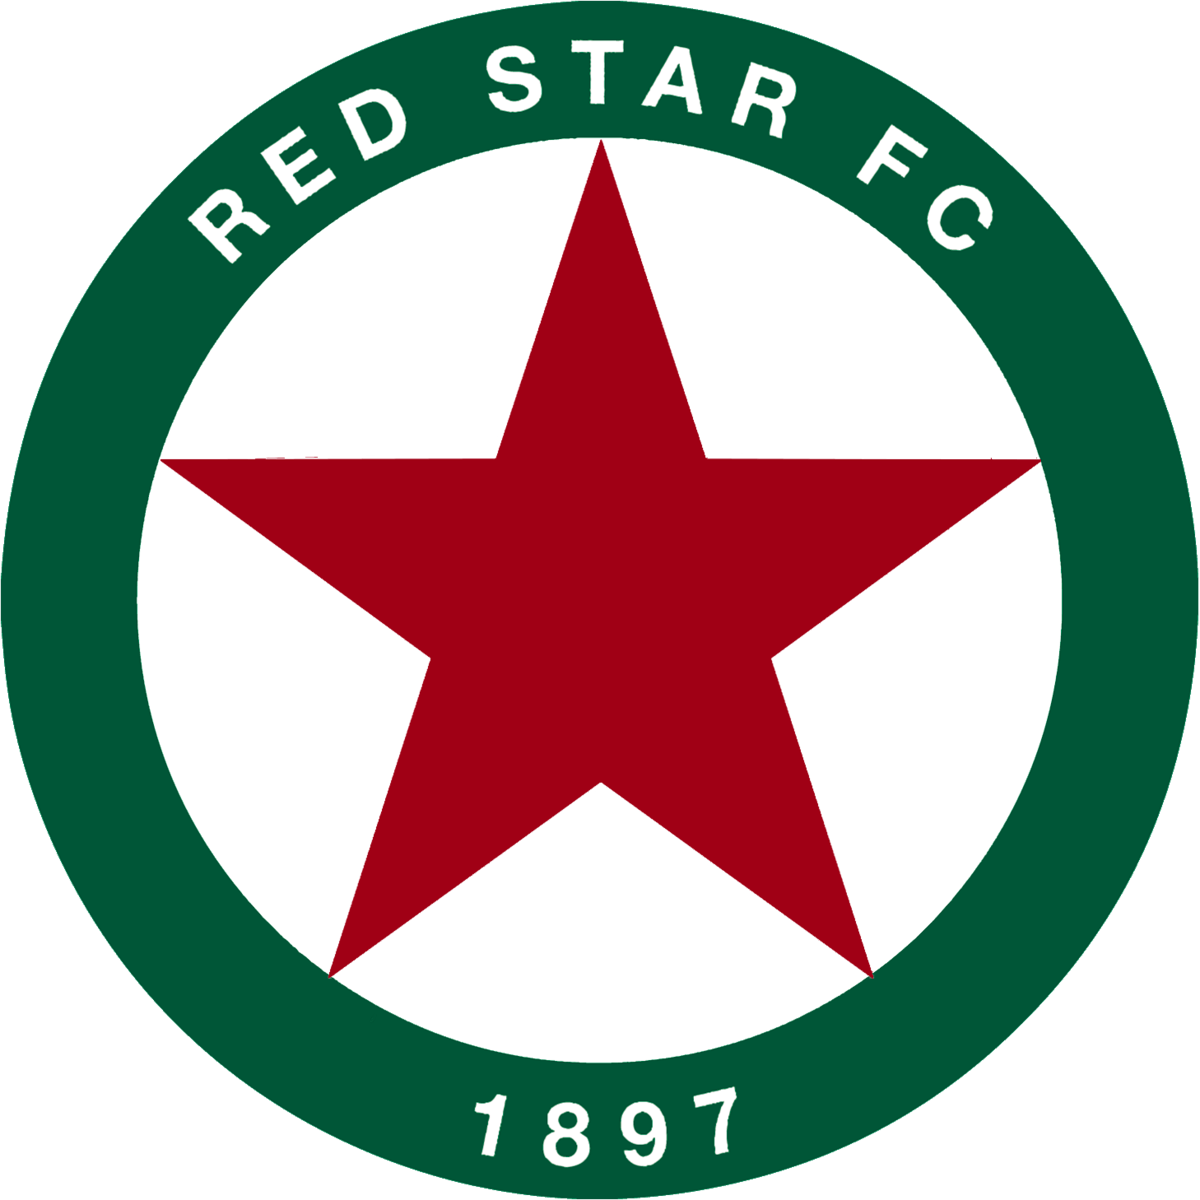 Red Star T Logo - Red Star F.C.